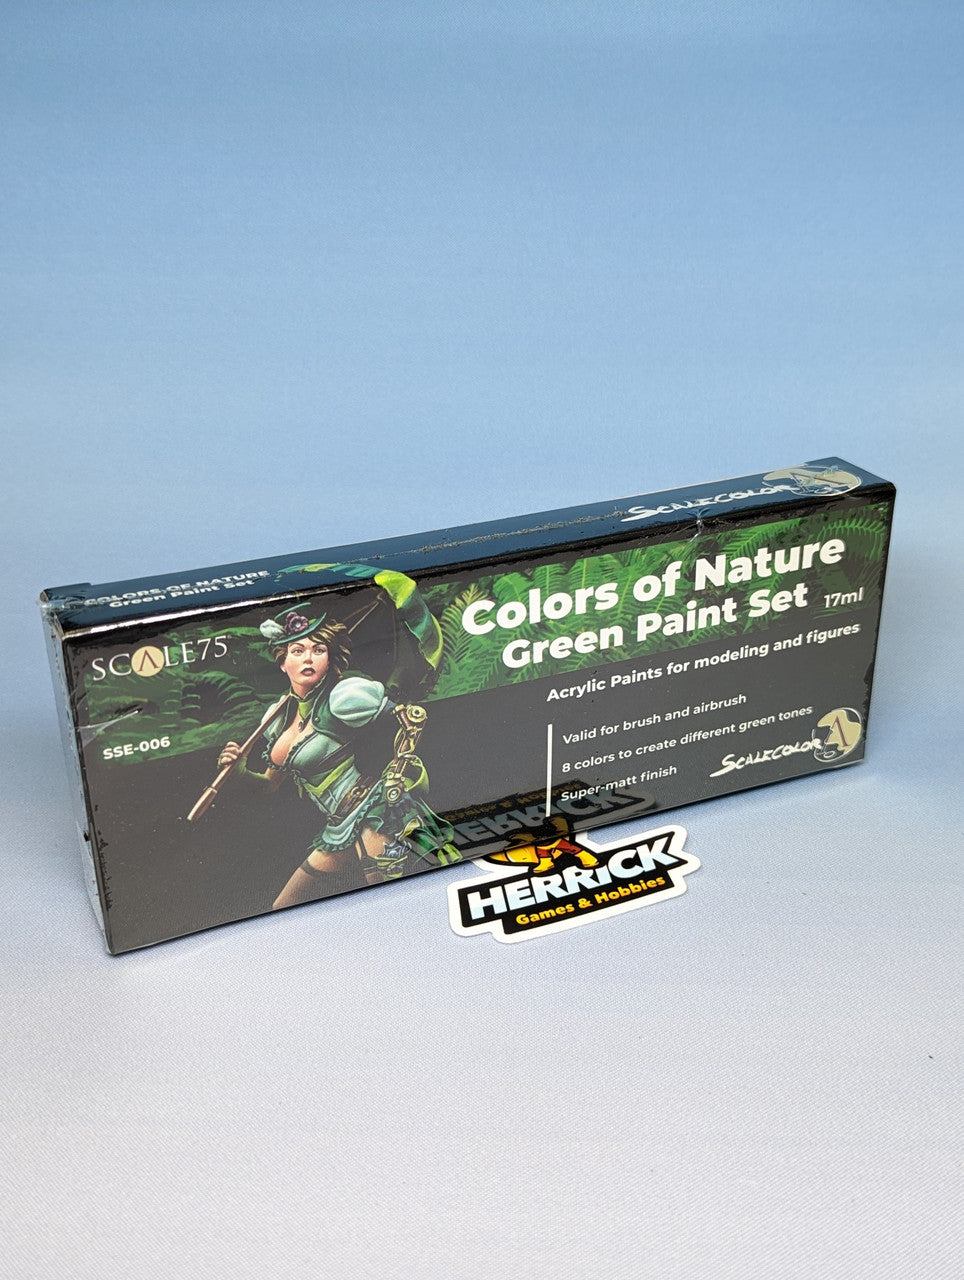 Scale75: Colors of Nature Green Paint Set